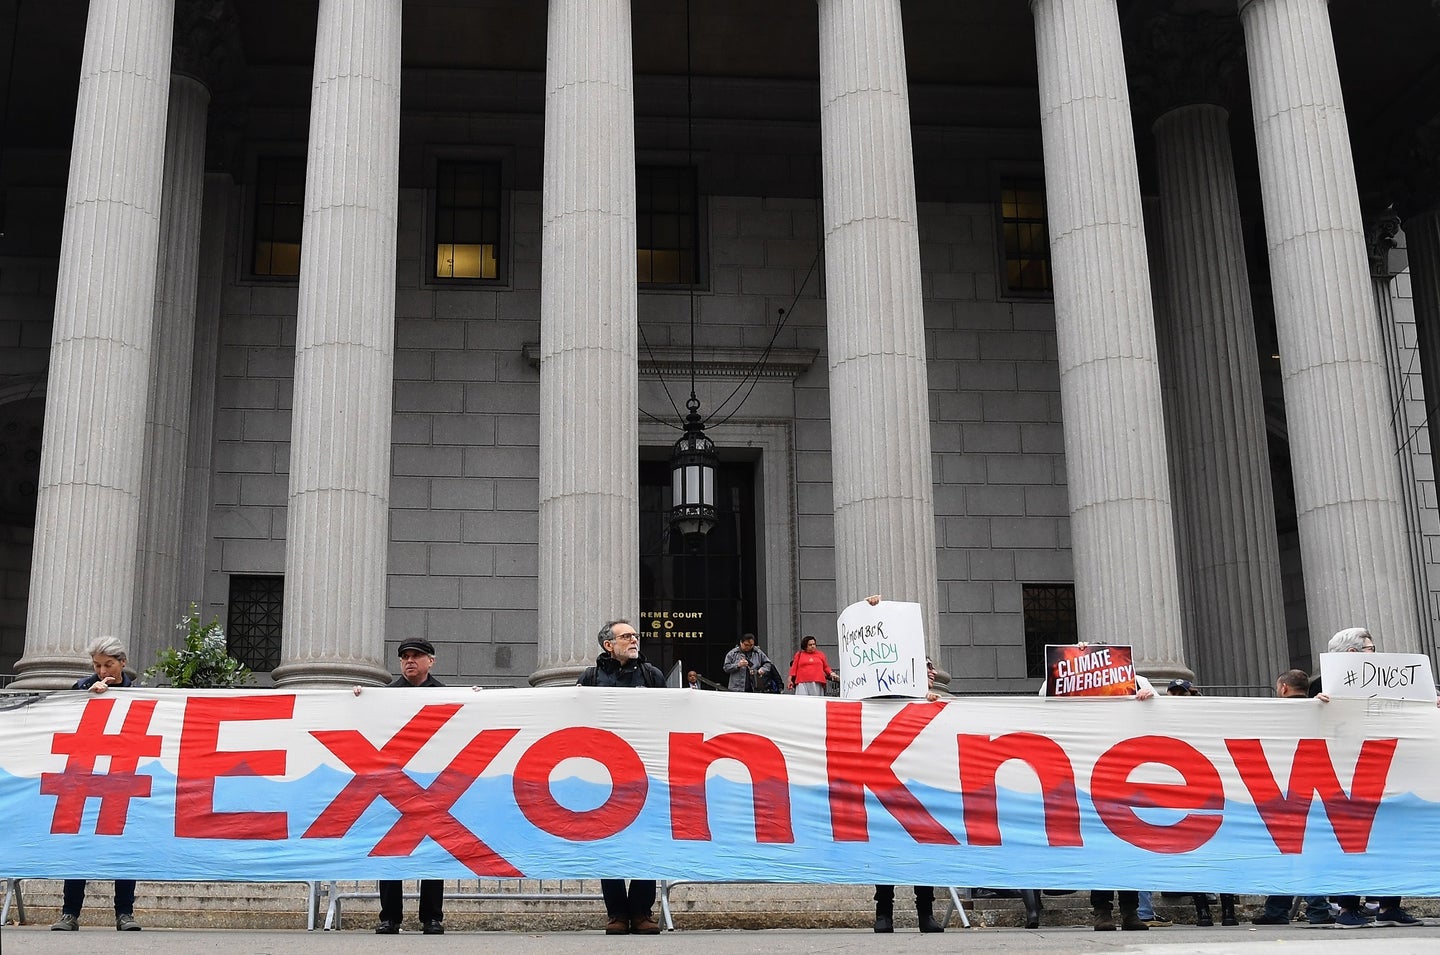 People stand in front of a courthouse holding up a large banner reading #ExxonKnew